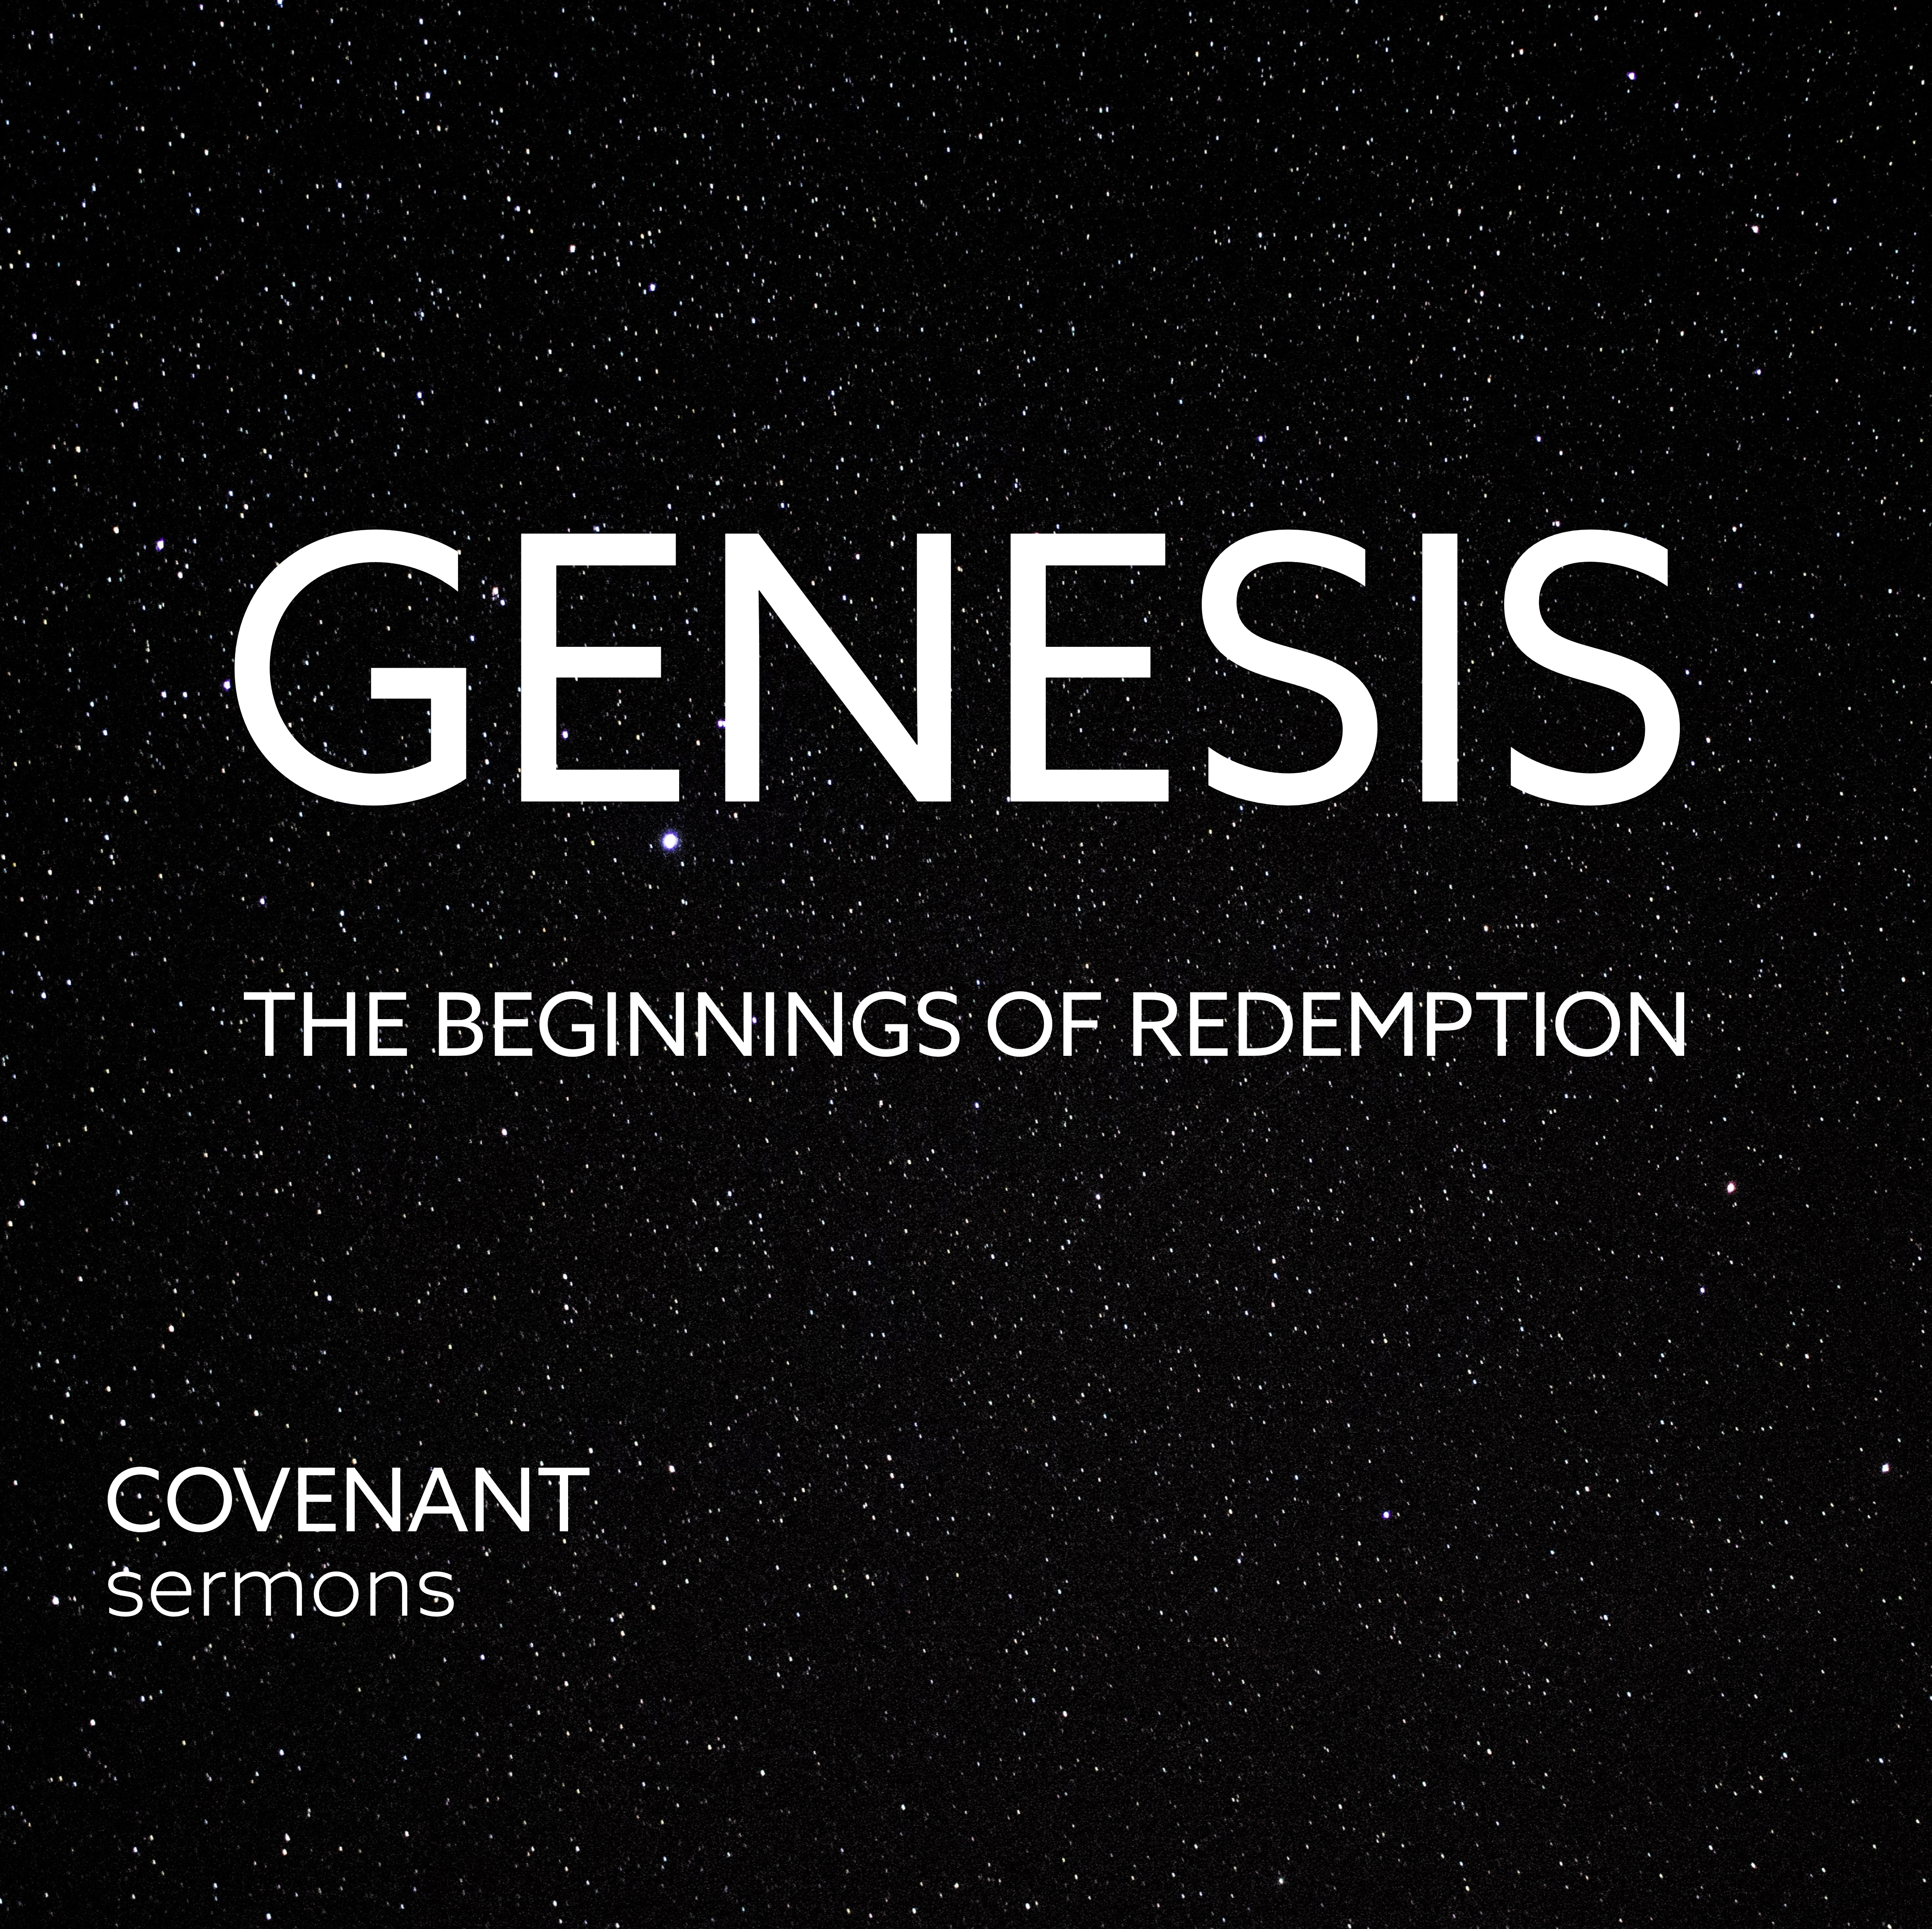 The Triumph of Sin and the Promises of God | Genesis 4:1-6:8